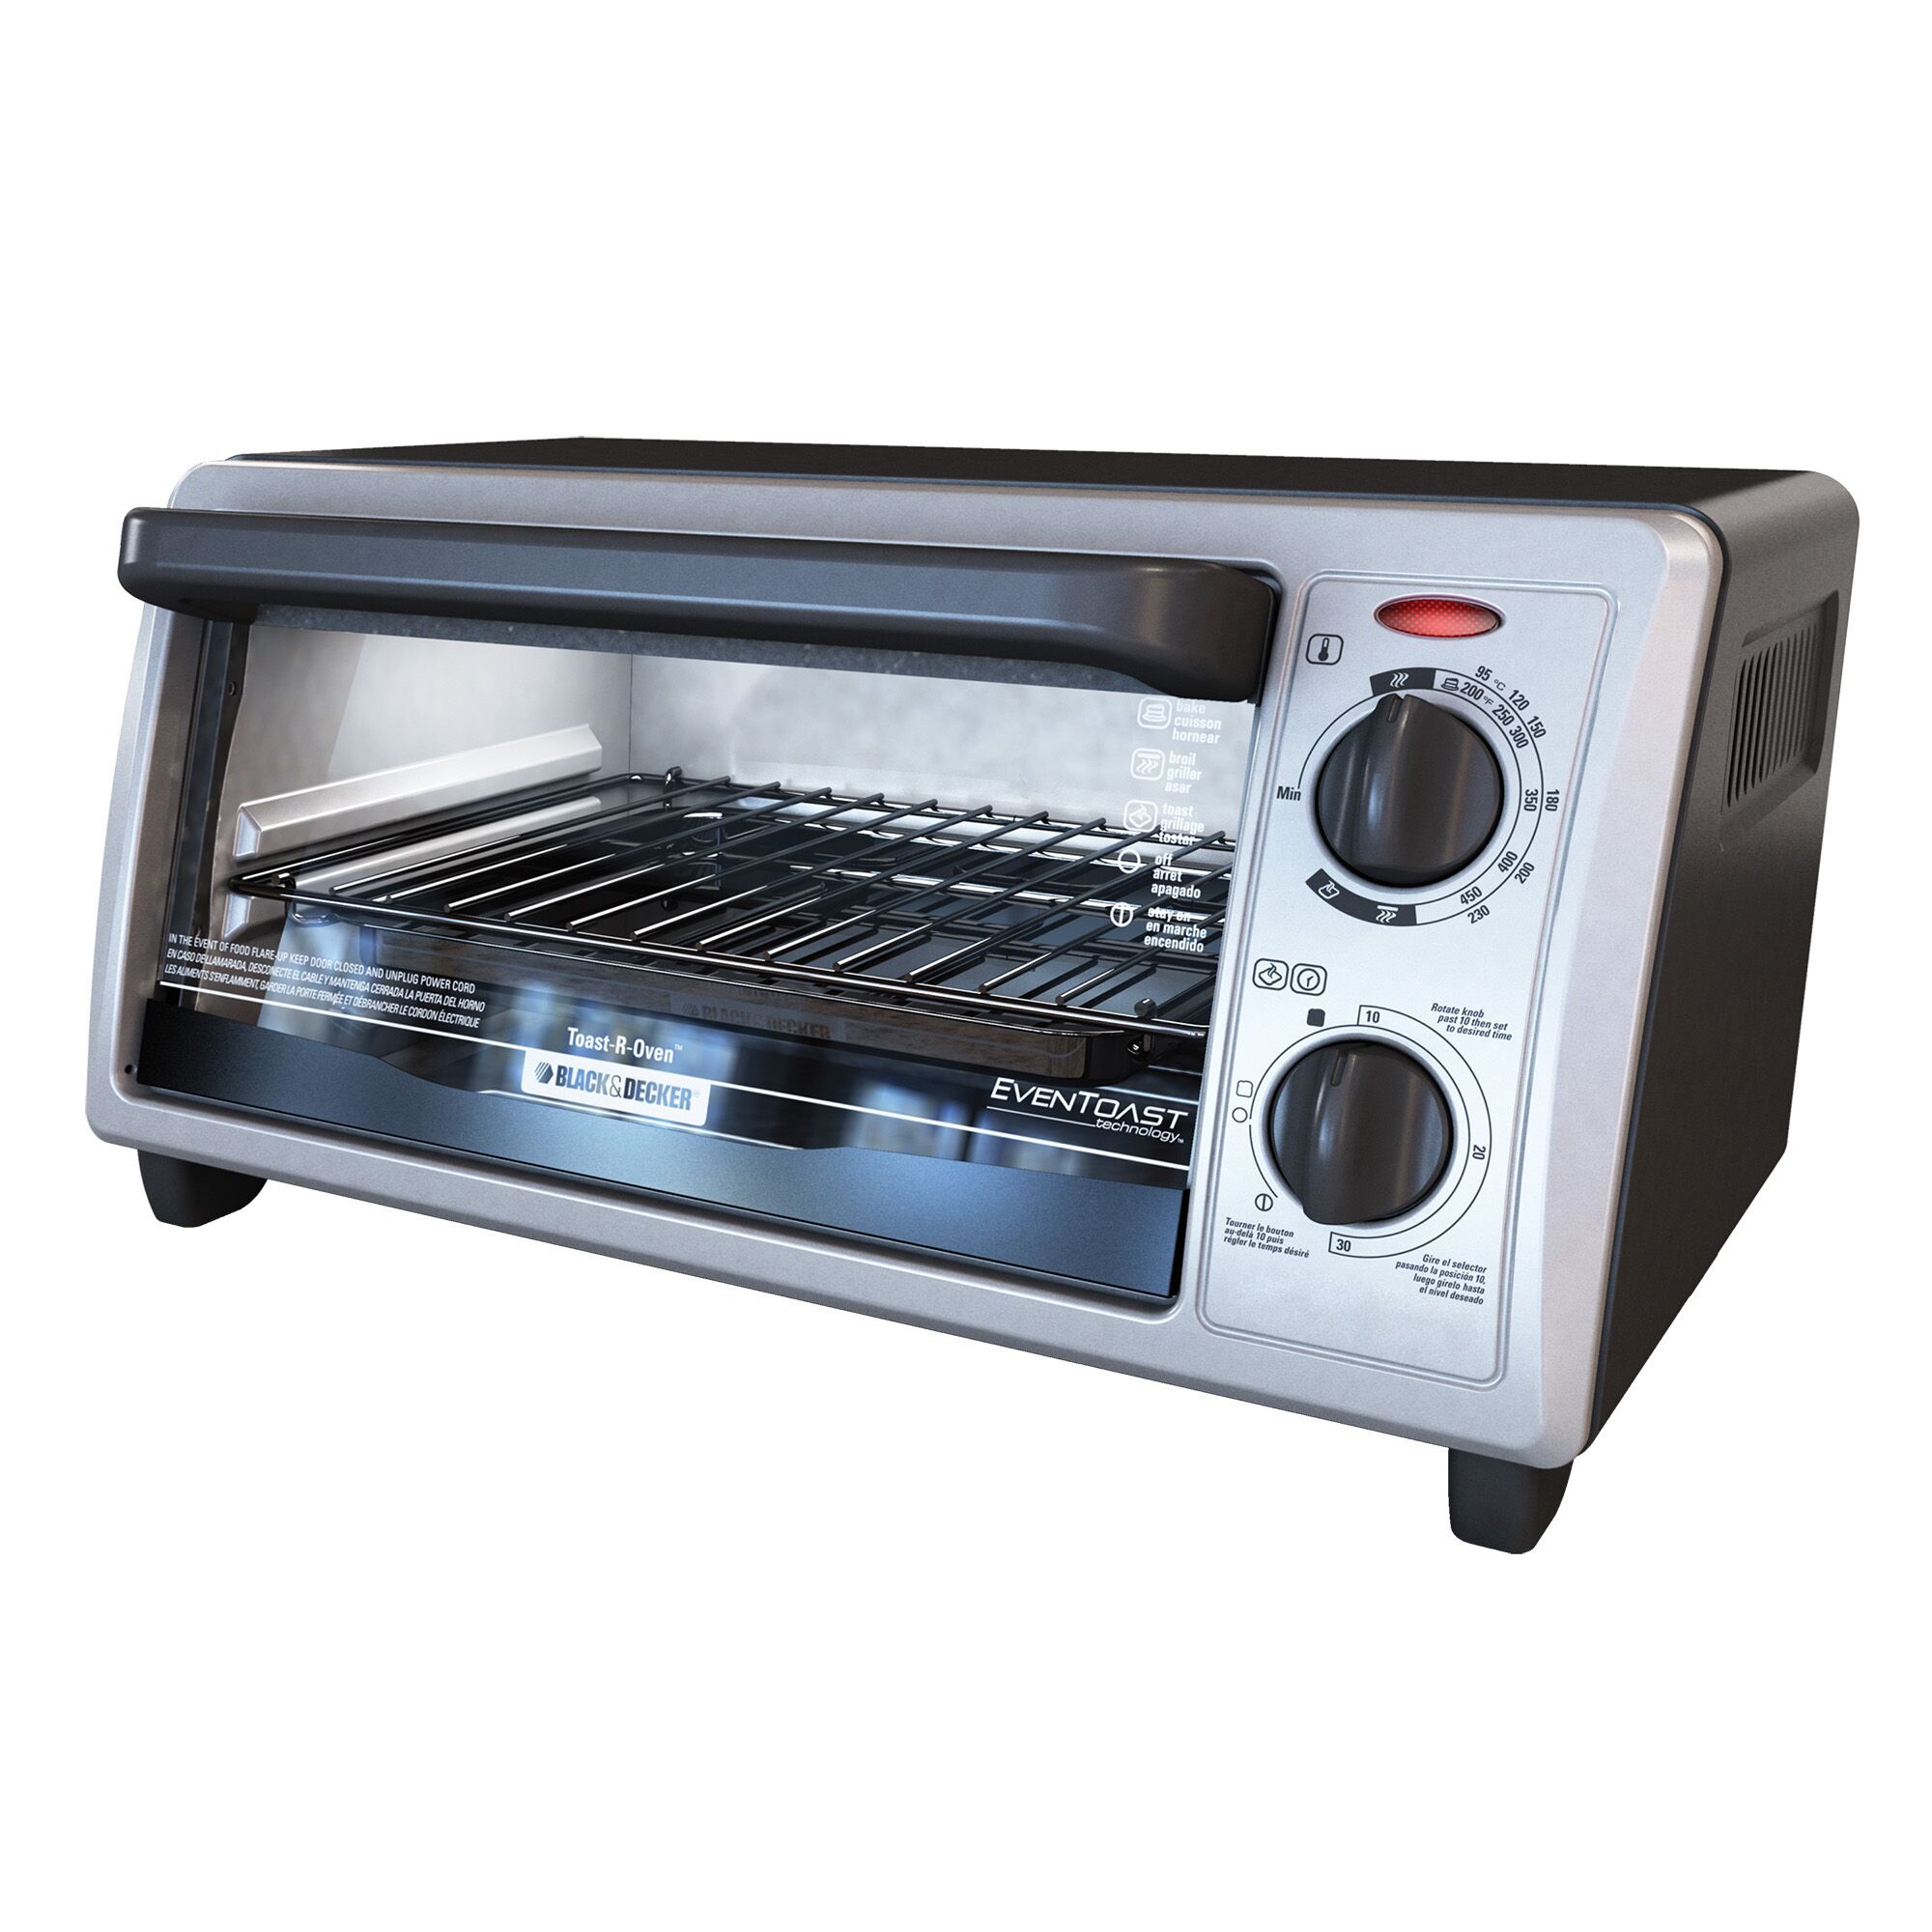 Profile of 4 slice countertop toaster oven .